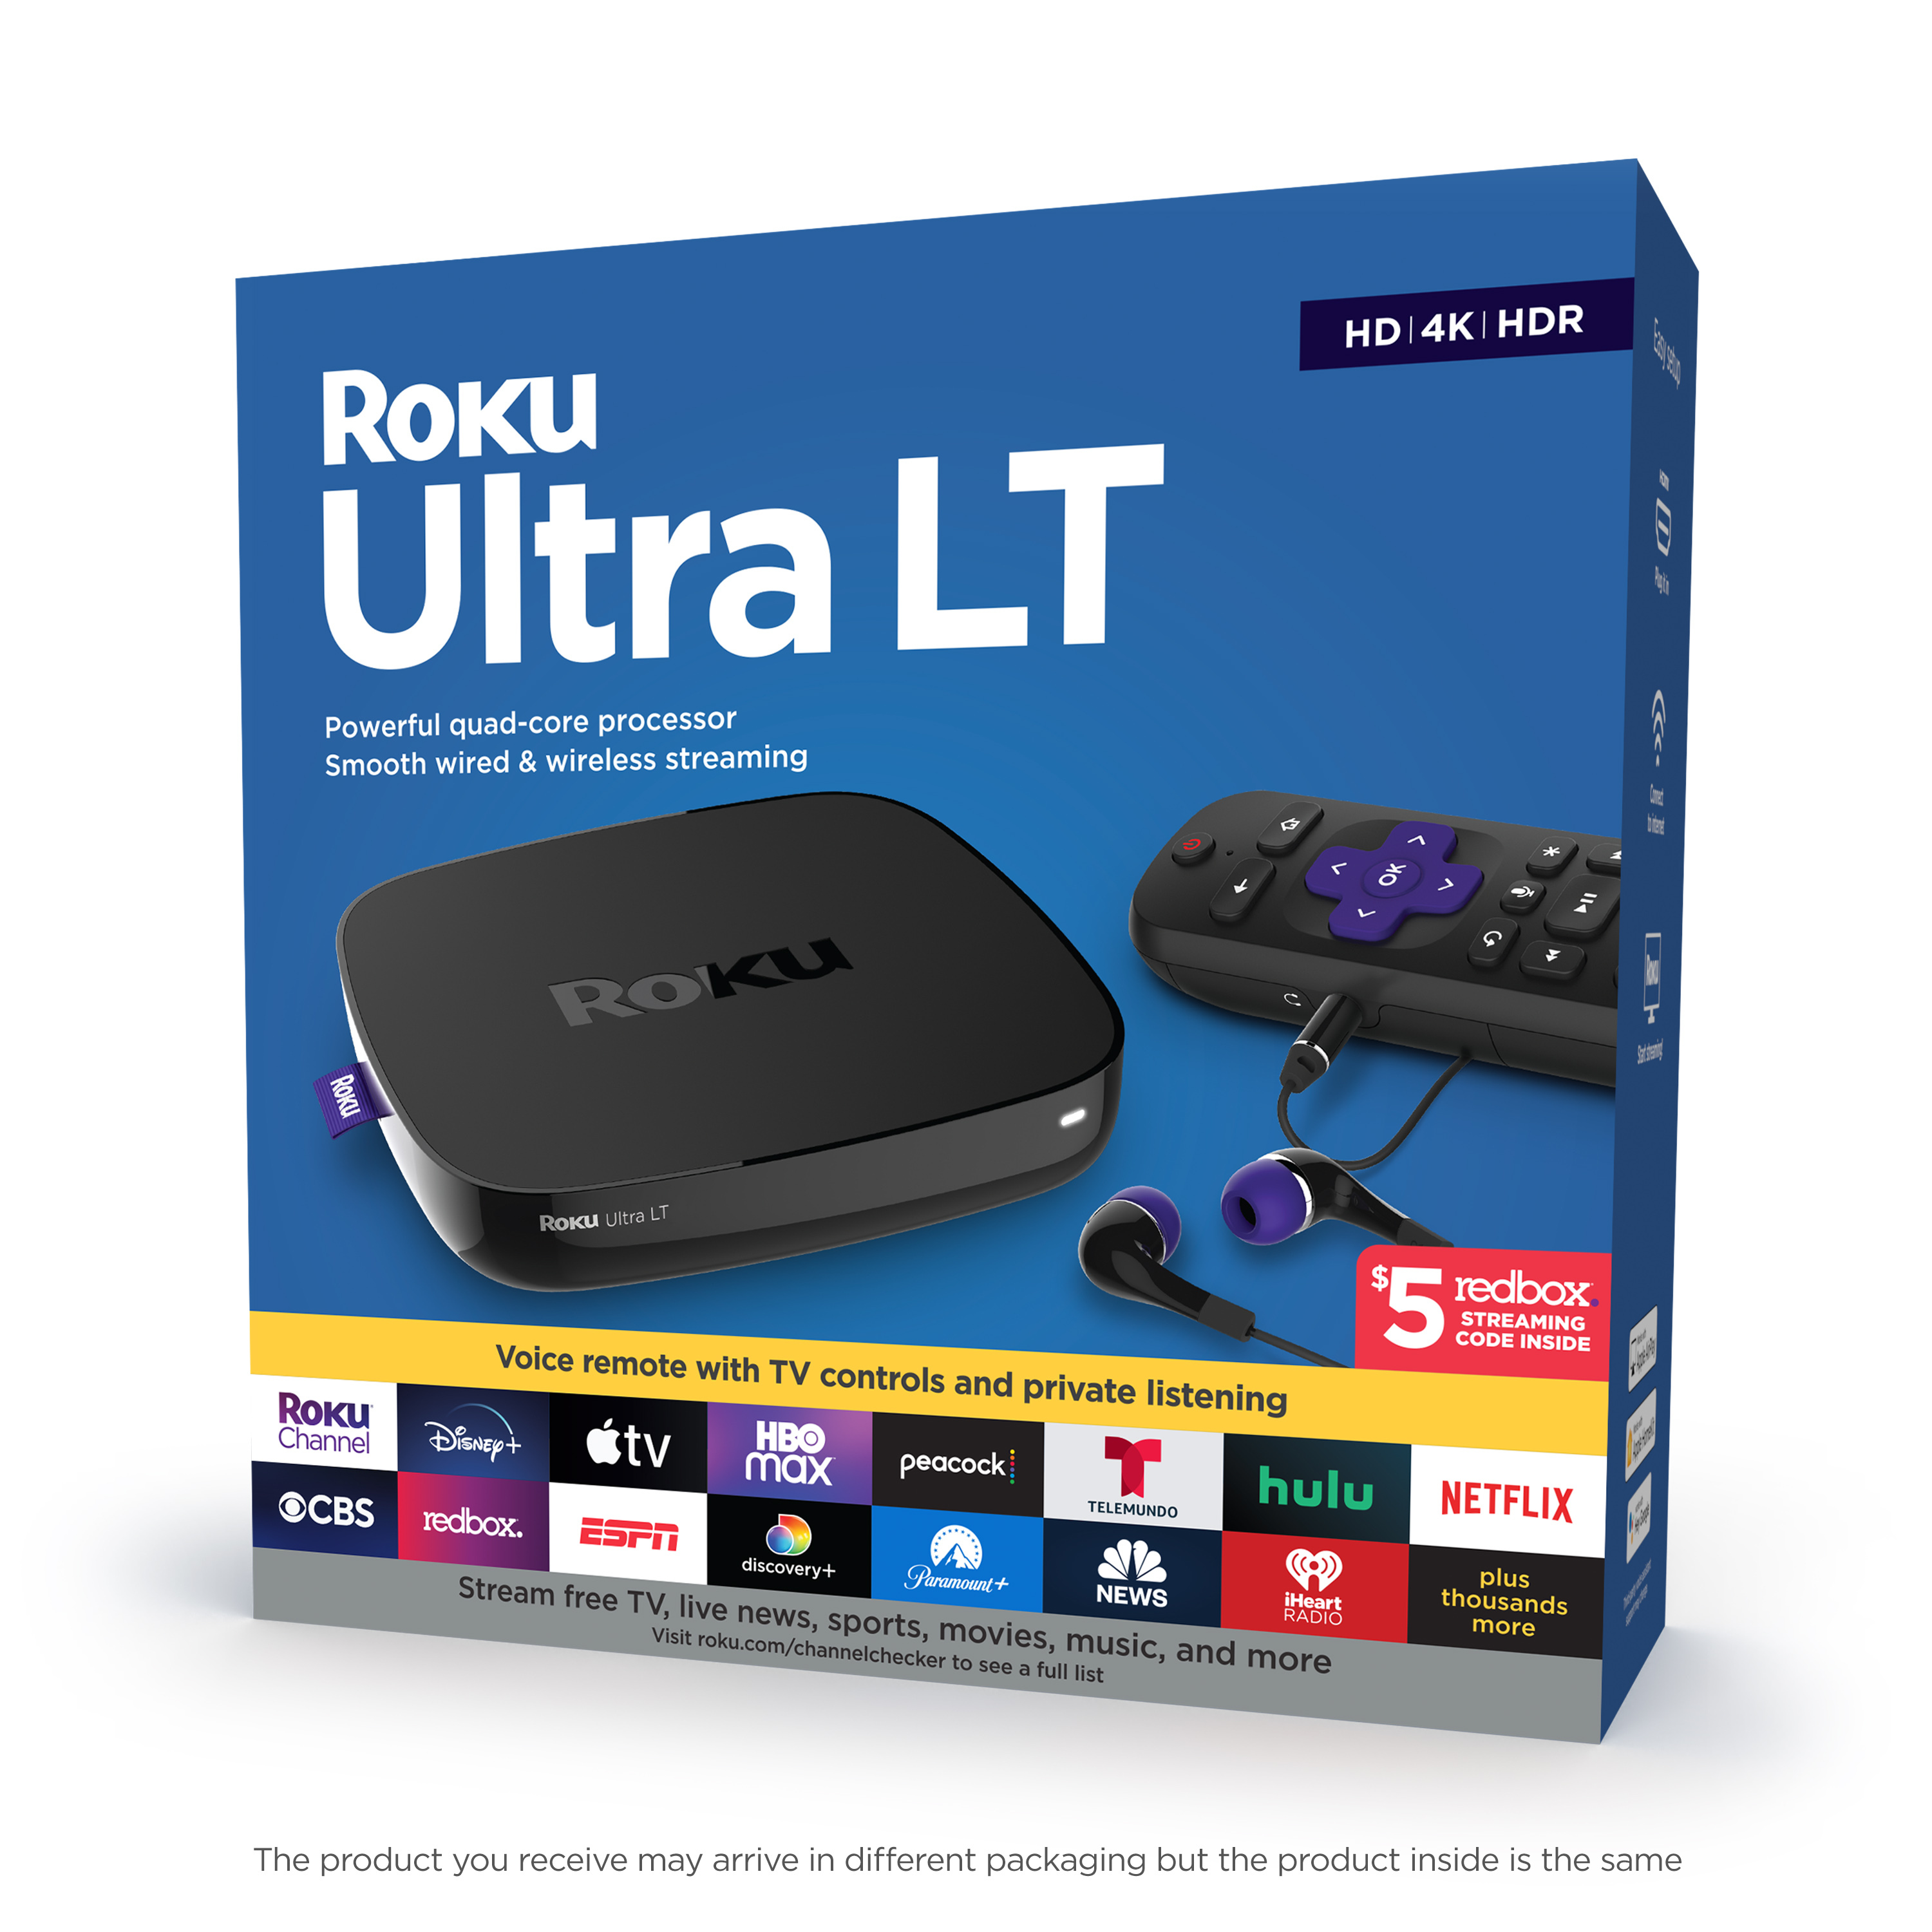 Roku Ultra LT 2019 HD/4K/HDR Streaming Device with Ethernet Port and Roku Voice Remote with Headphone Jack, includes Headphones - image 1 of 12